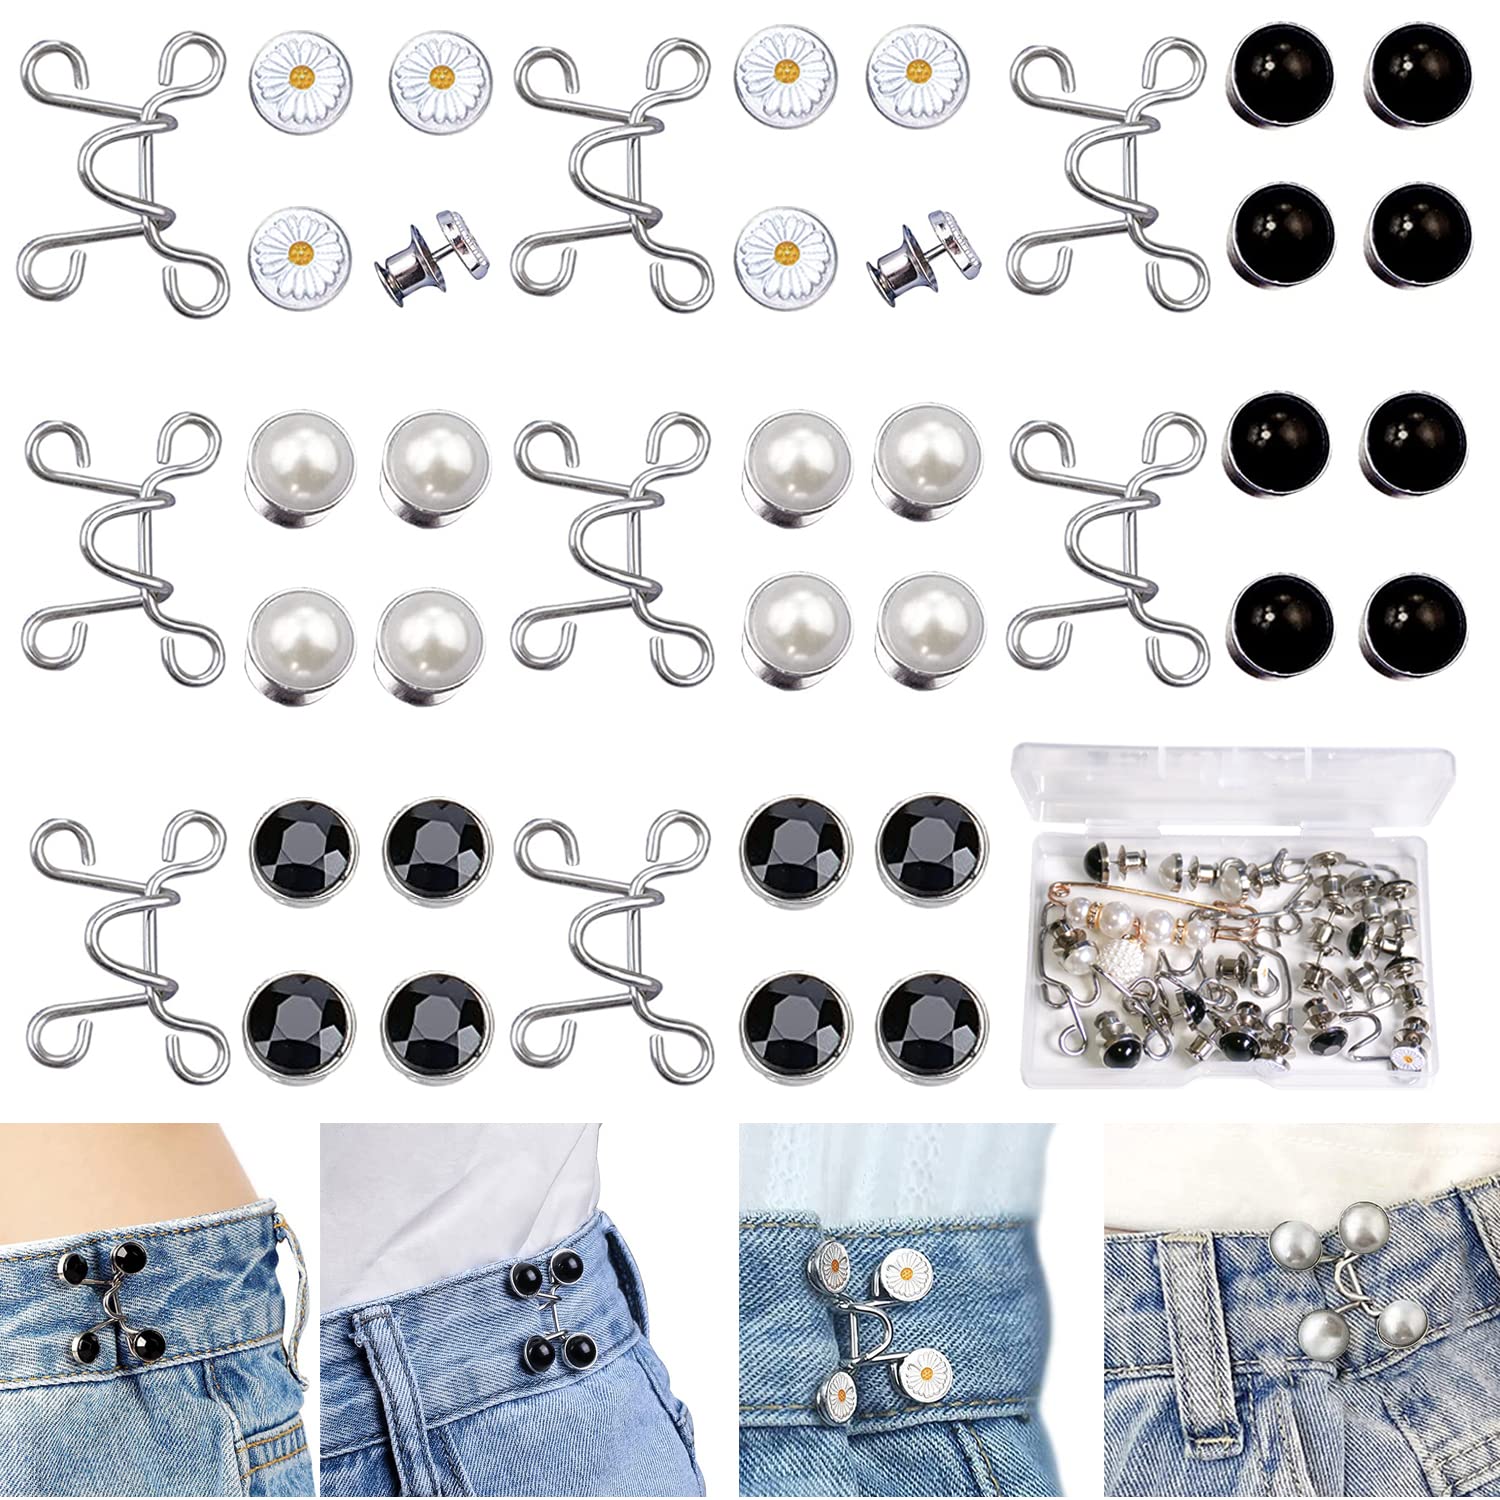 1 Set Of Pant Waist Tightener Instant Jean Buttons For Loose Jeans